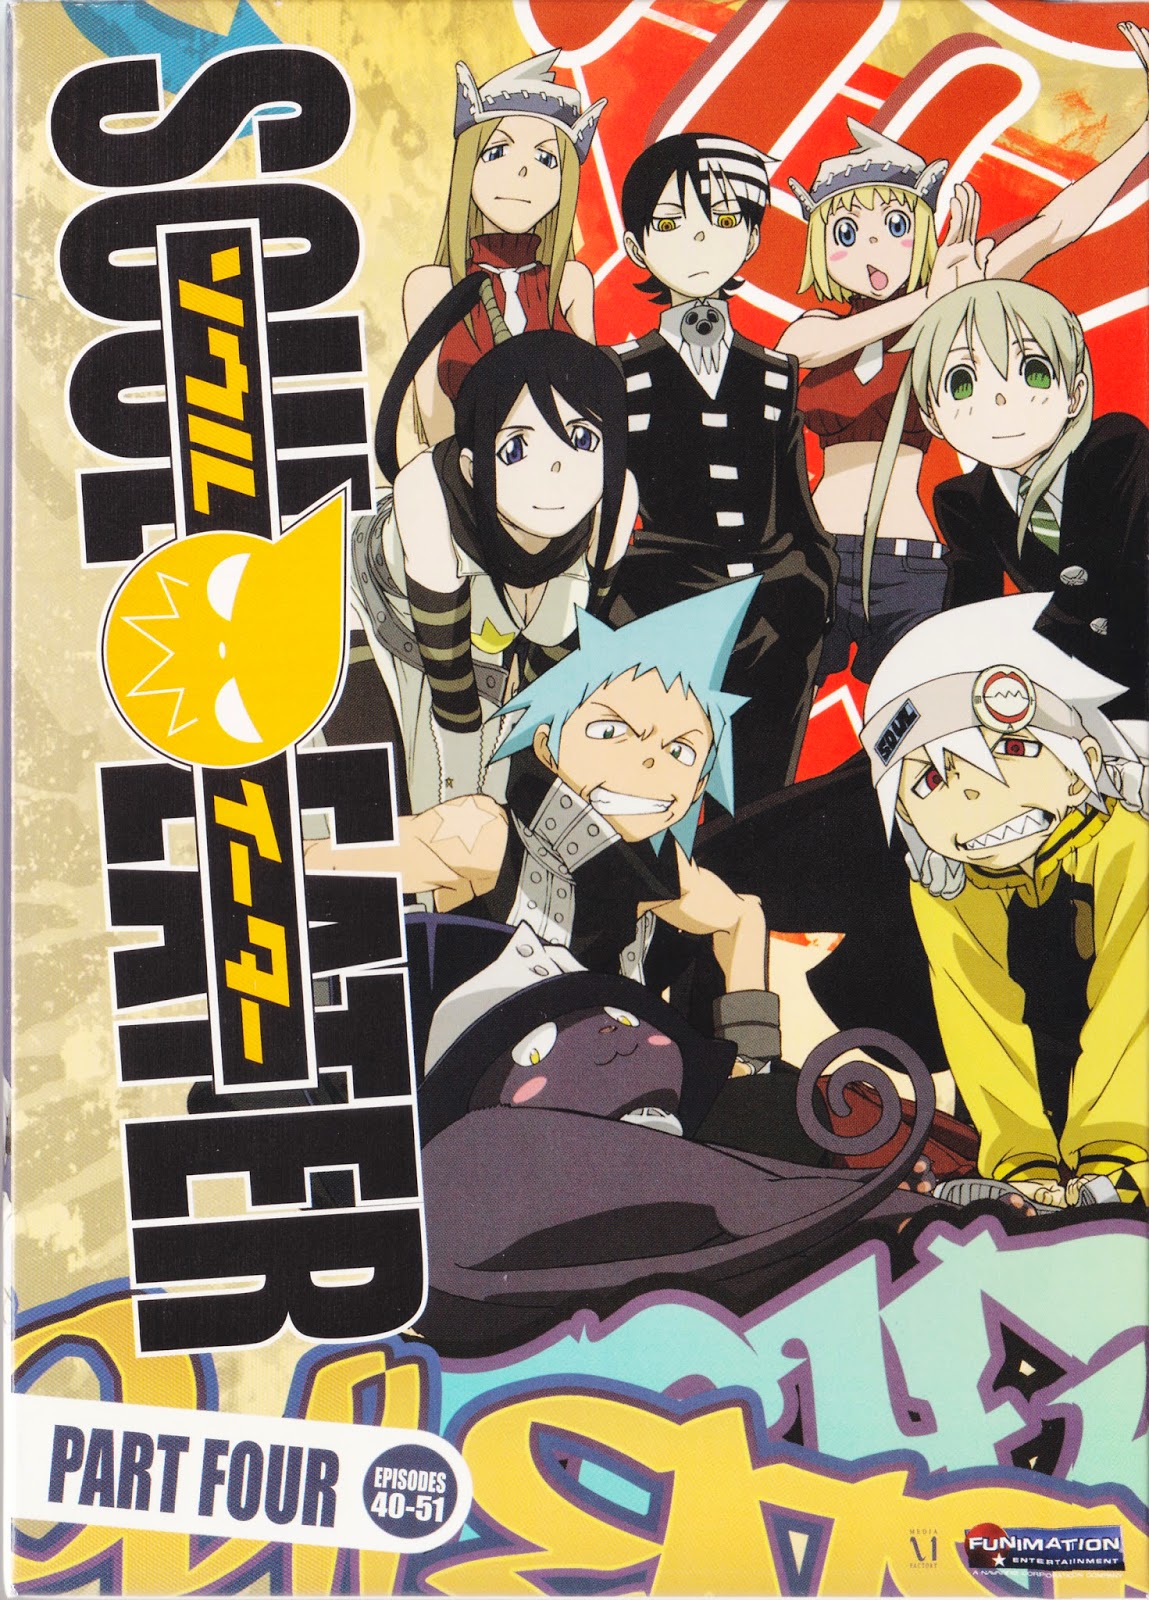 Anime Review: Soul Eater NOT!